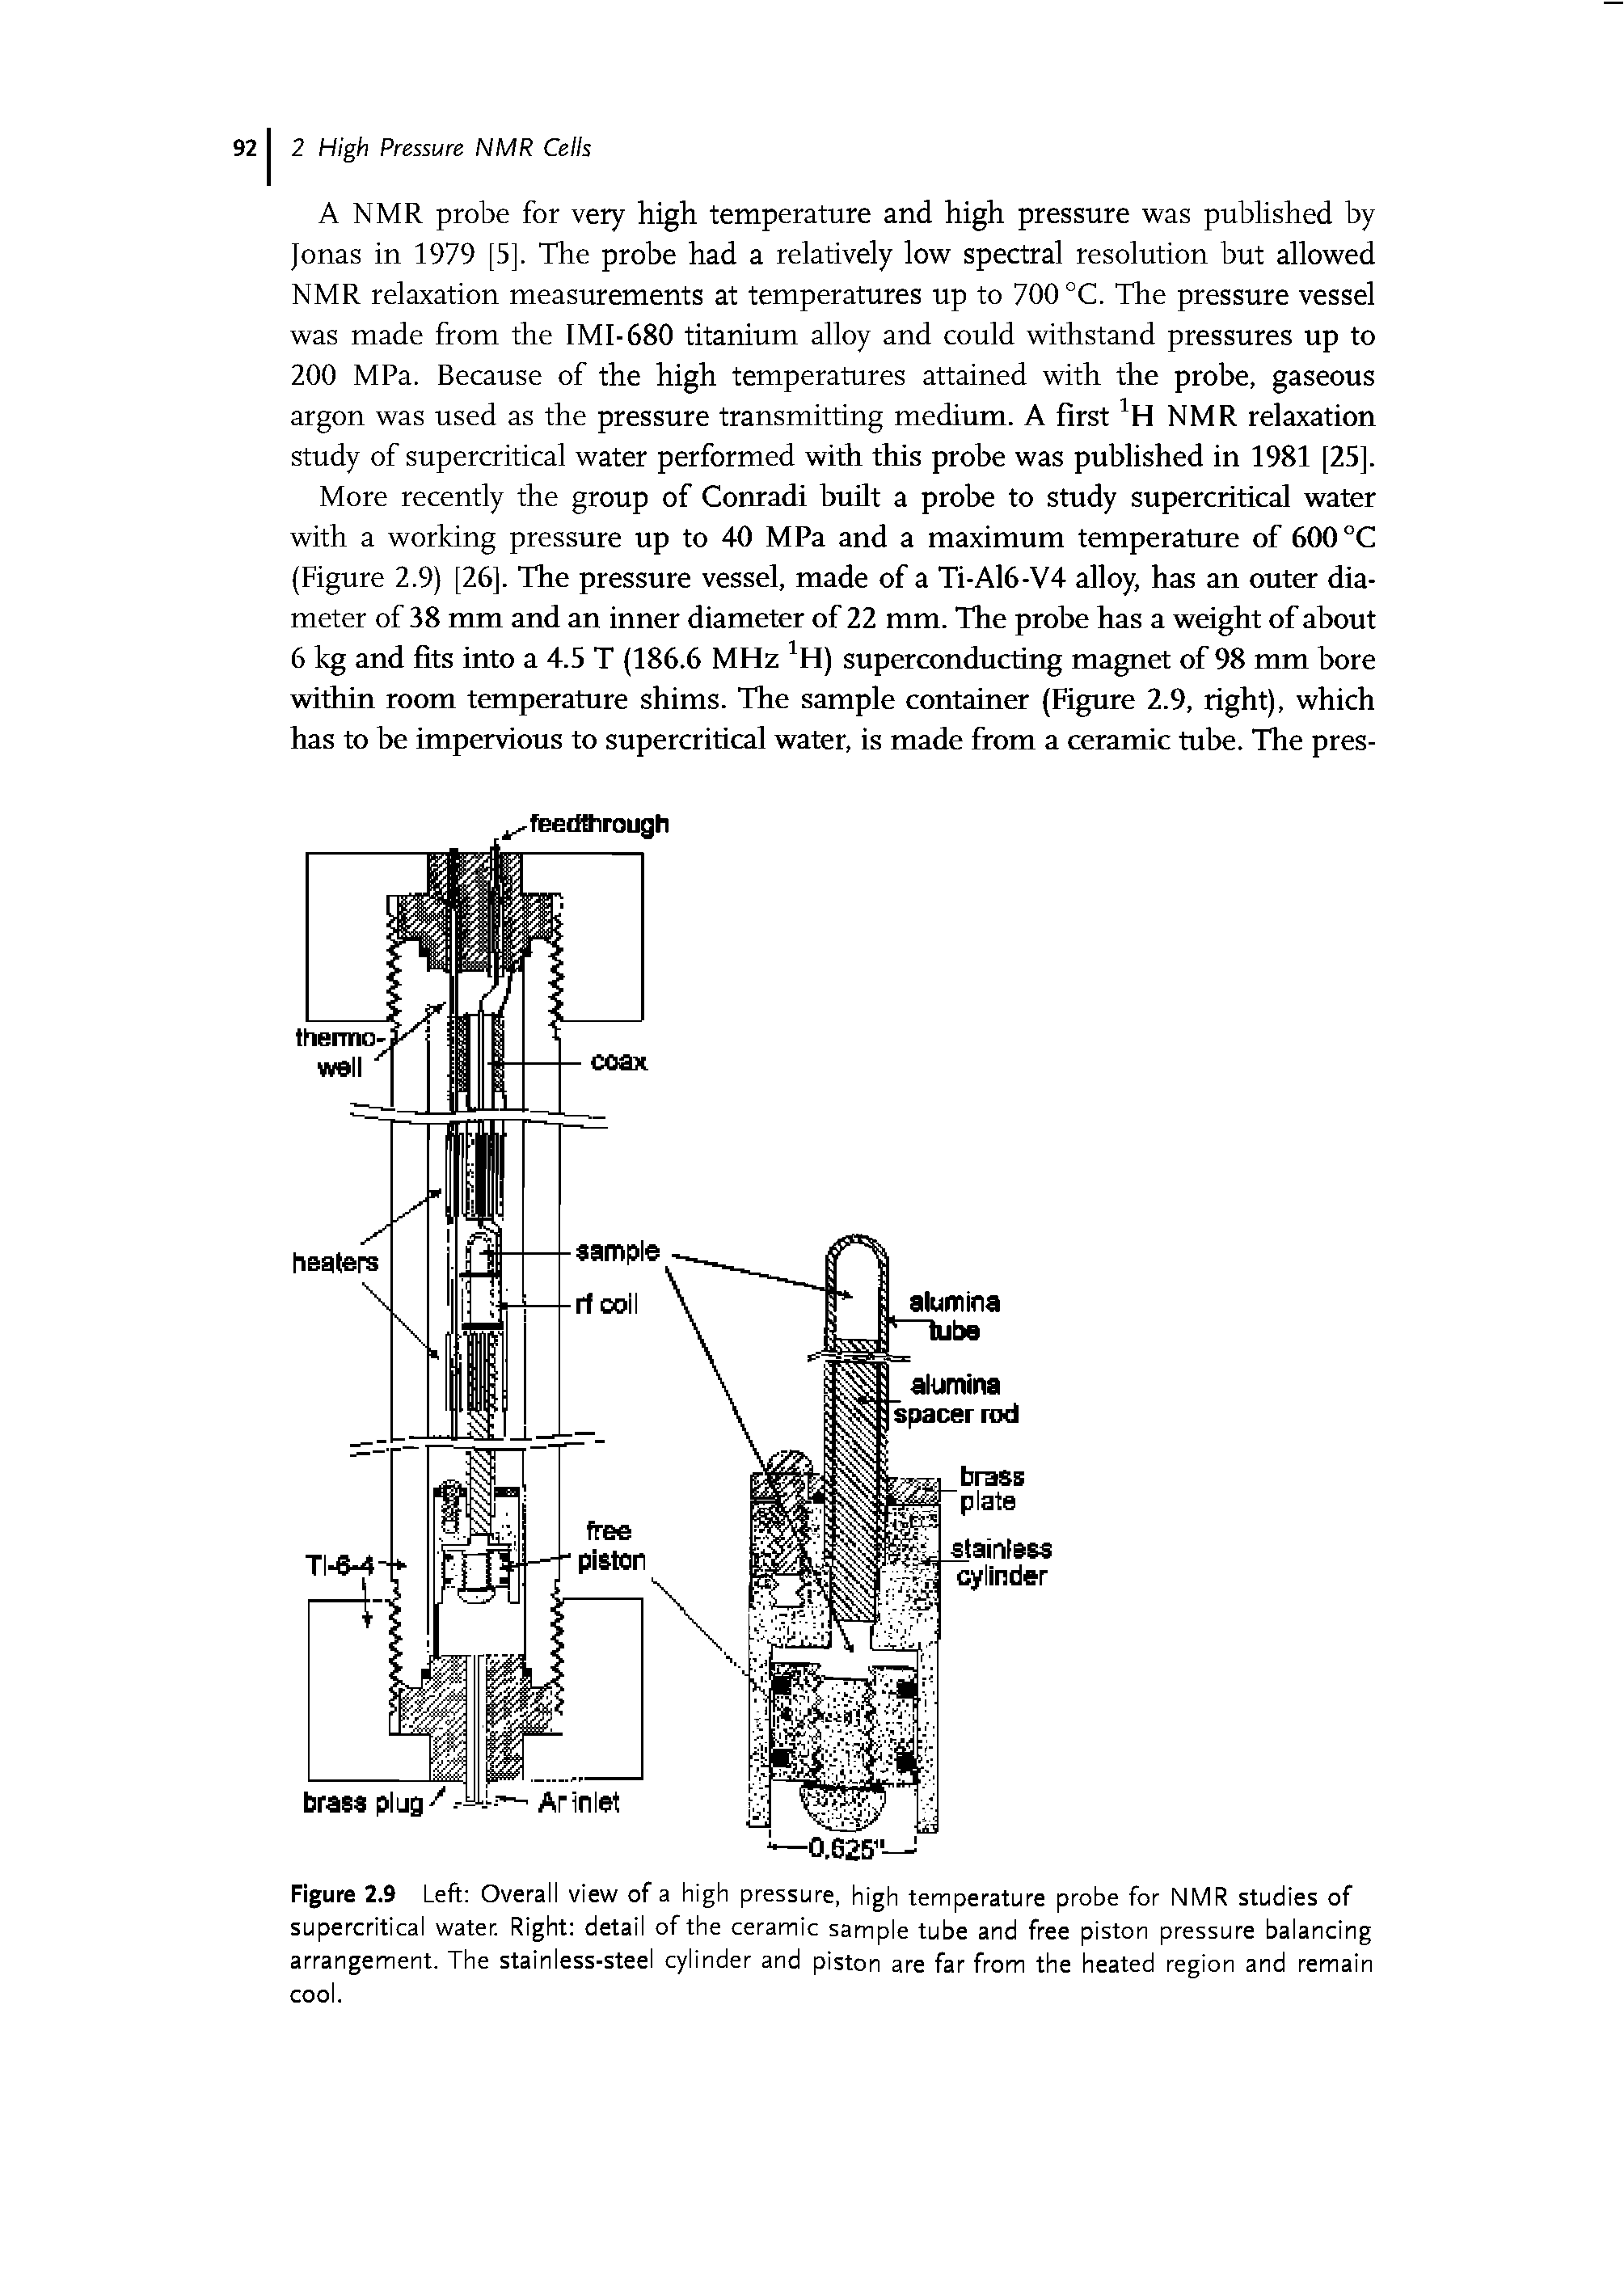 Figure 2.9 Left Overall view of a high pressure, high temperature probe for NMR studies of supercritical water. Right detail of the ceramic sample tube and free piston pressure balancing arrangement. The stainless-steel cylinder and piston are far from the heated region and remain cool.